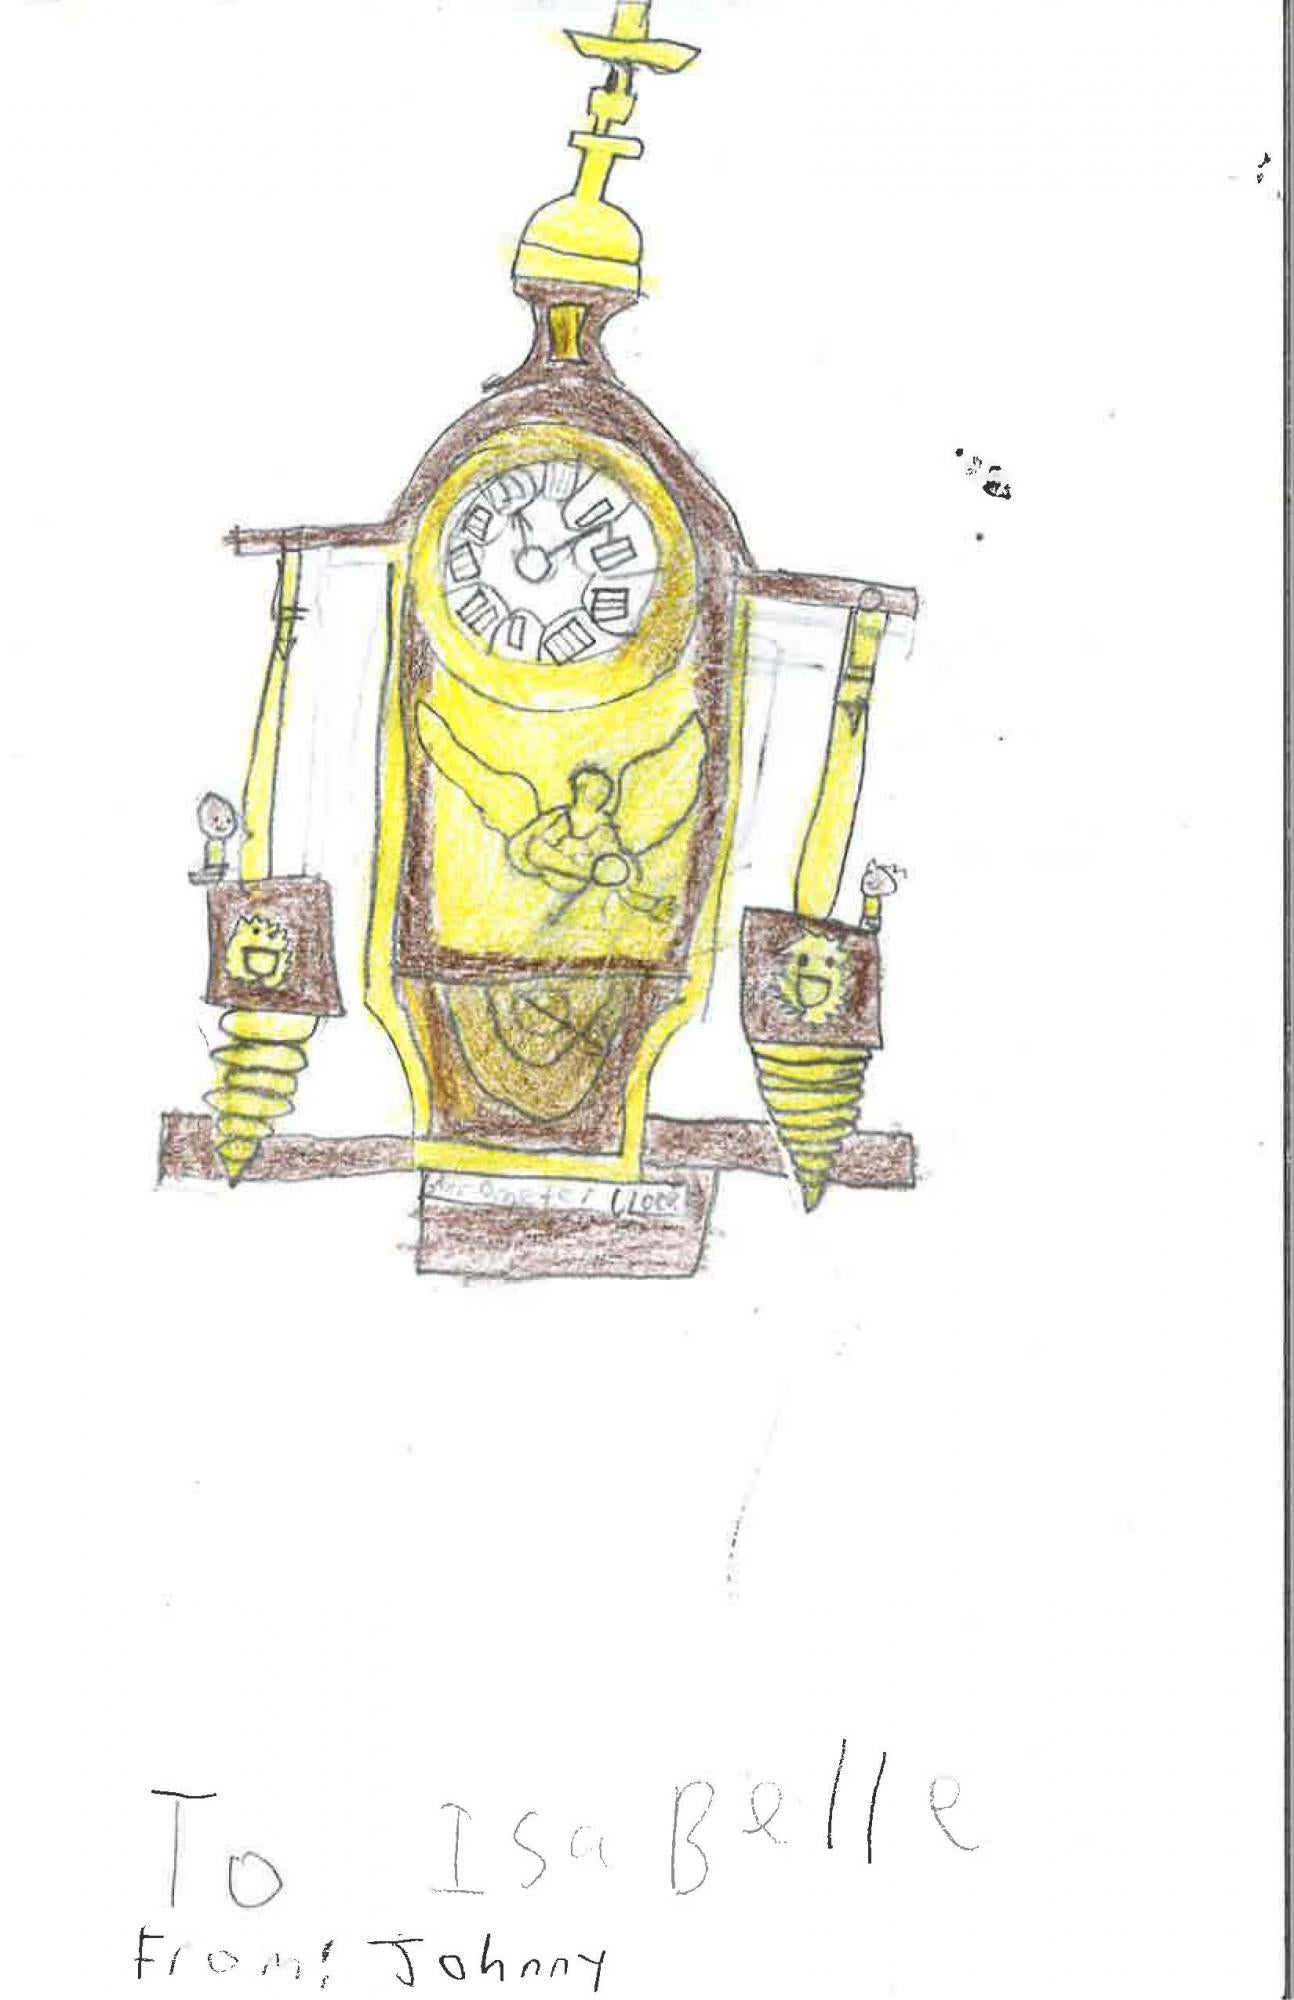 student drawing of clock and letter